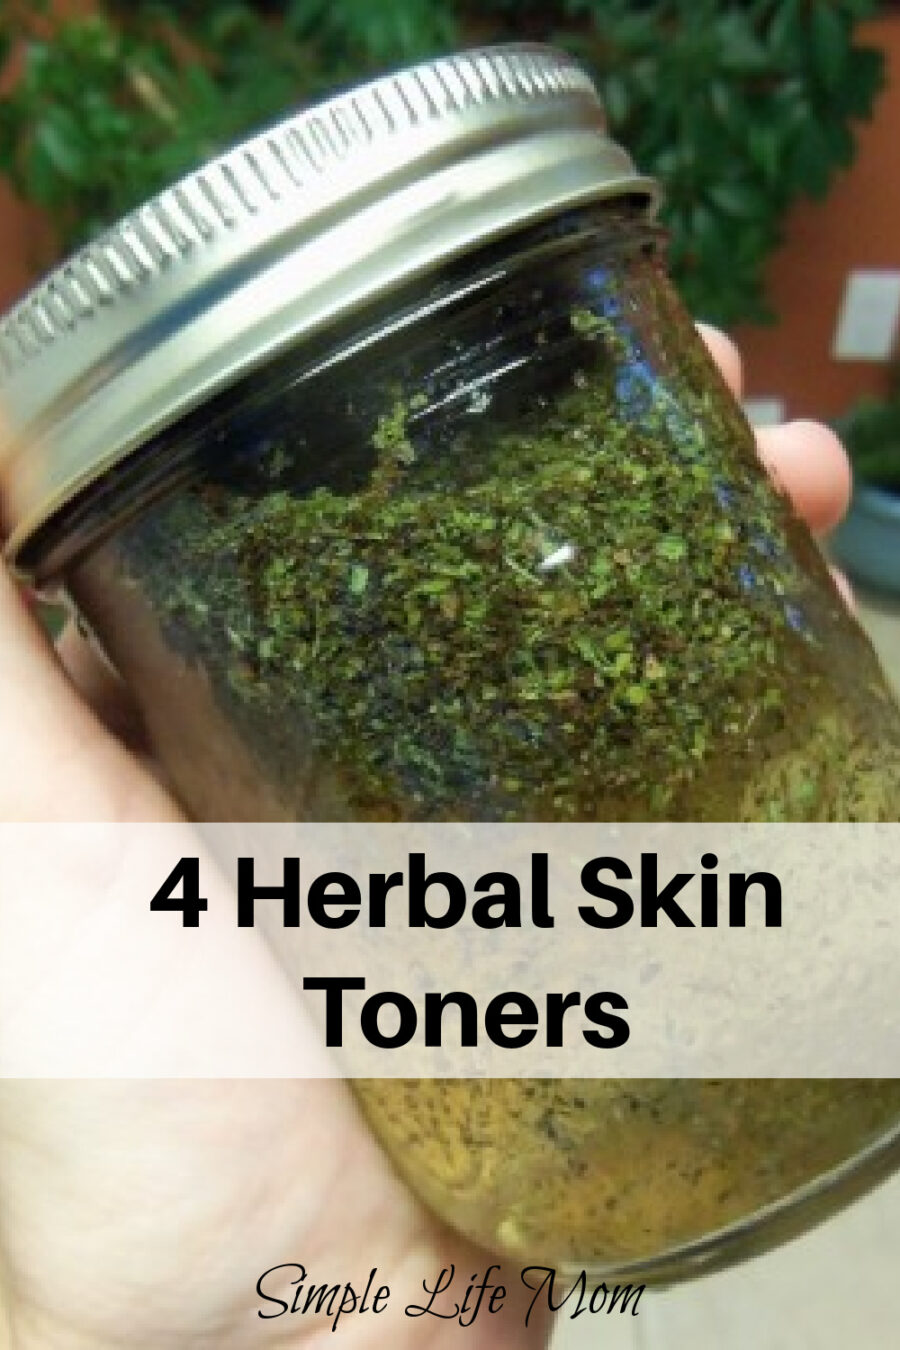 4 Herbal Skin Toners recipes so that you can use natural and organic ingredients for a variety of skin conditions and beauty routines. Natural astringents.